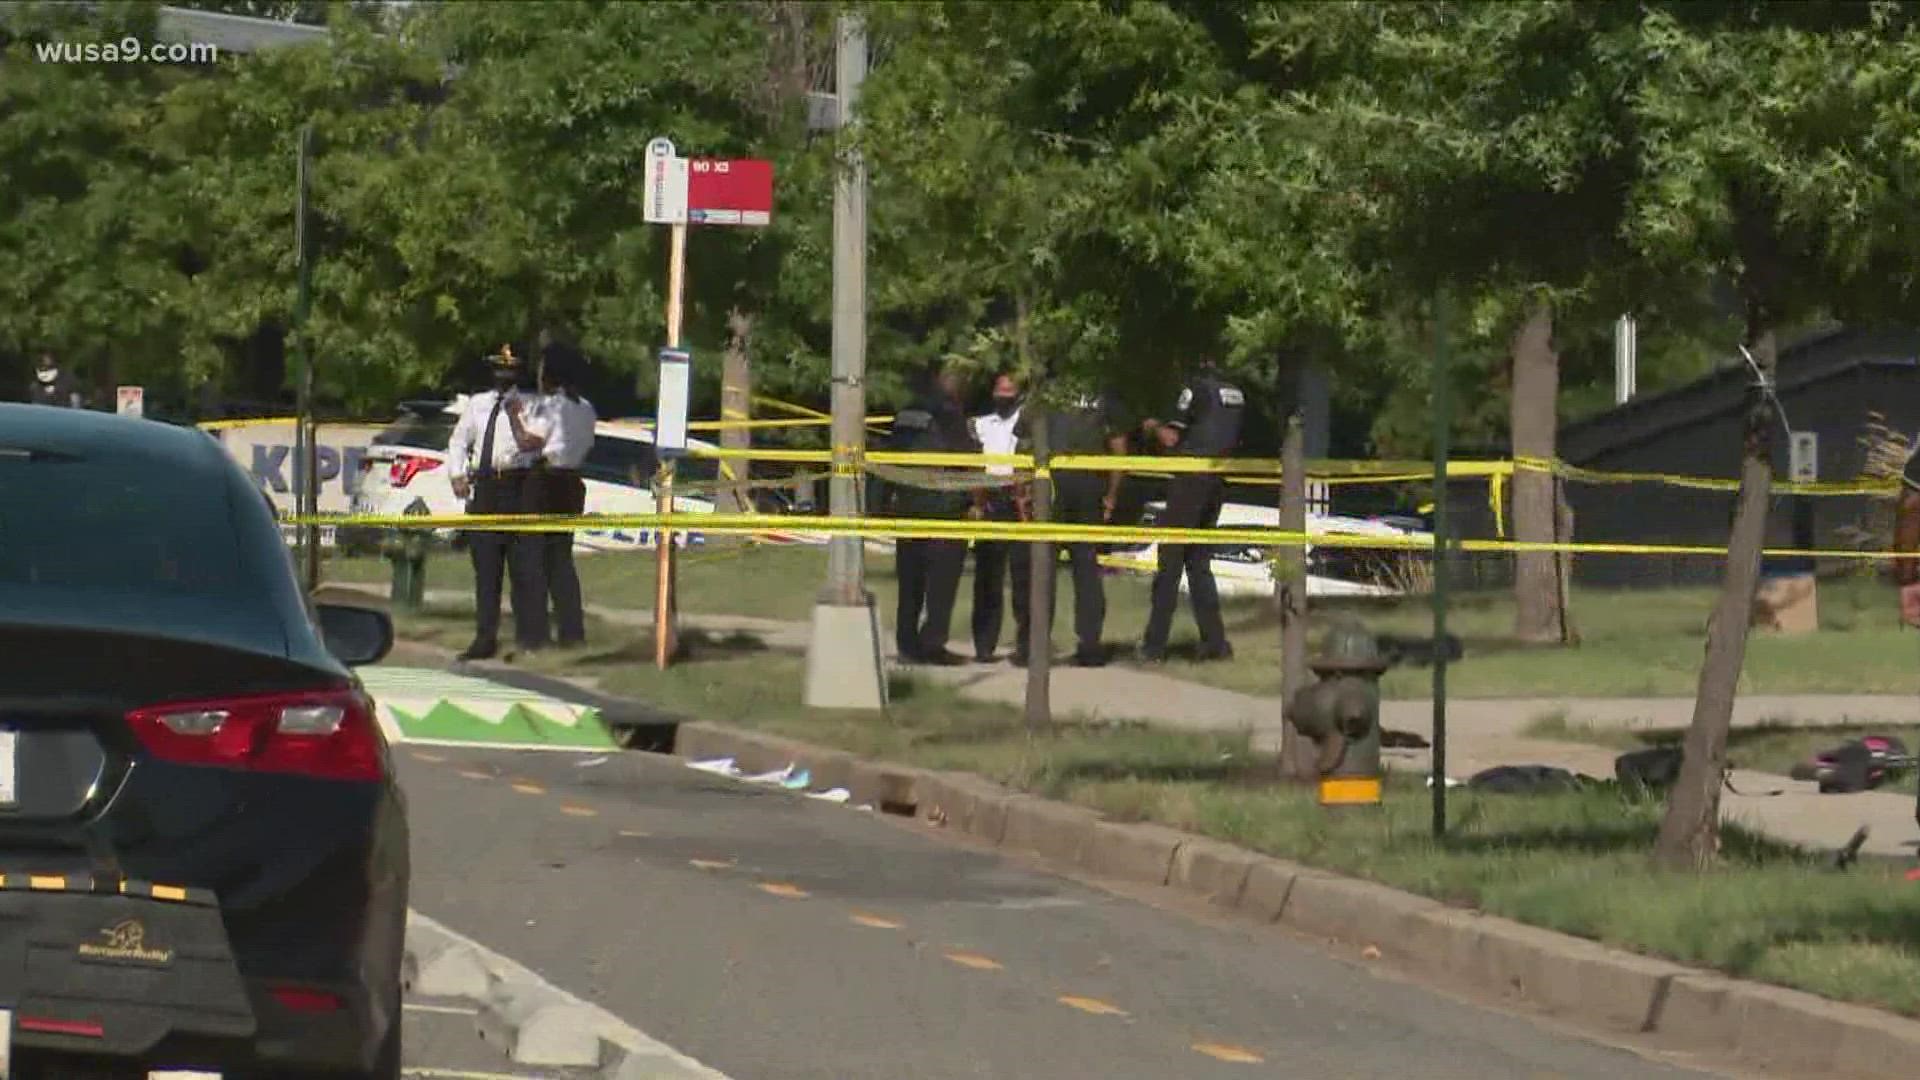 The teen was stabbed in the 1400 block of Brentwood Parkway, Northeast, during an altercation that happened around 3 p.m. on Wednesday, said D.C. Police.